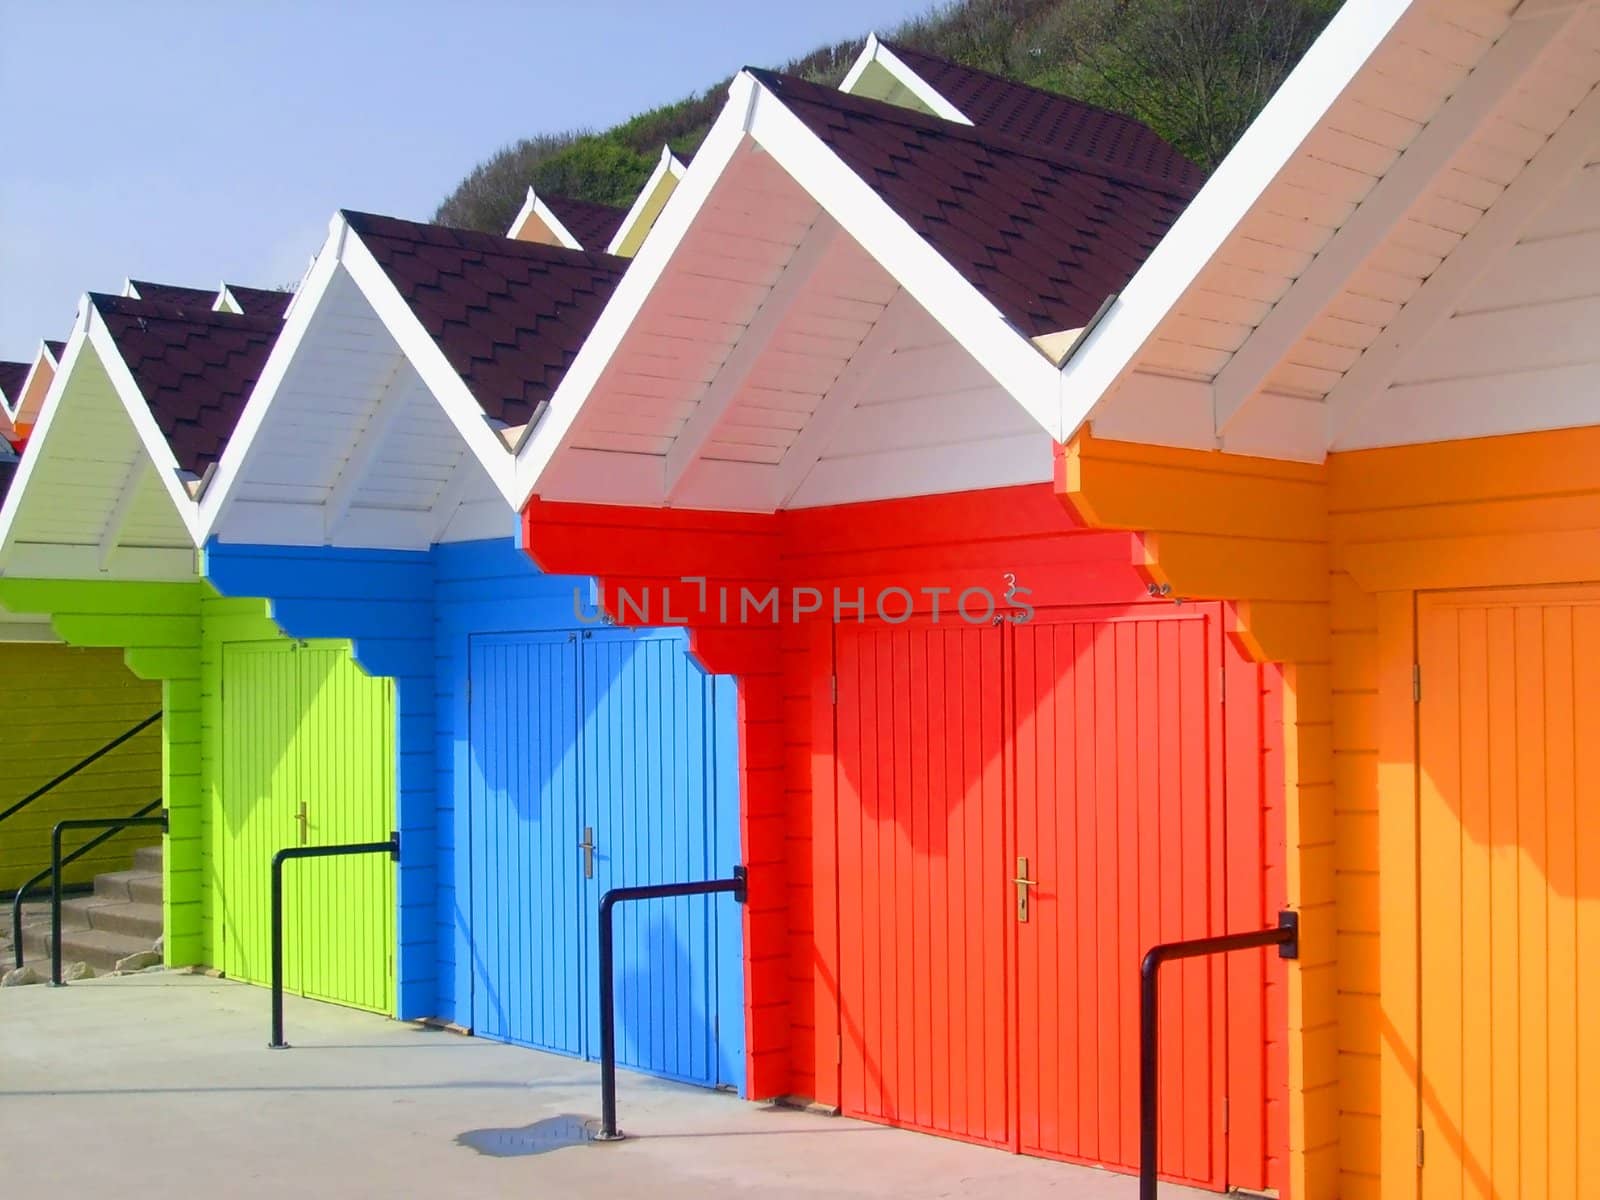 Colorful beach chalets by seaside by speedfighter